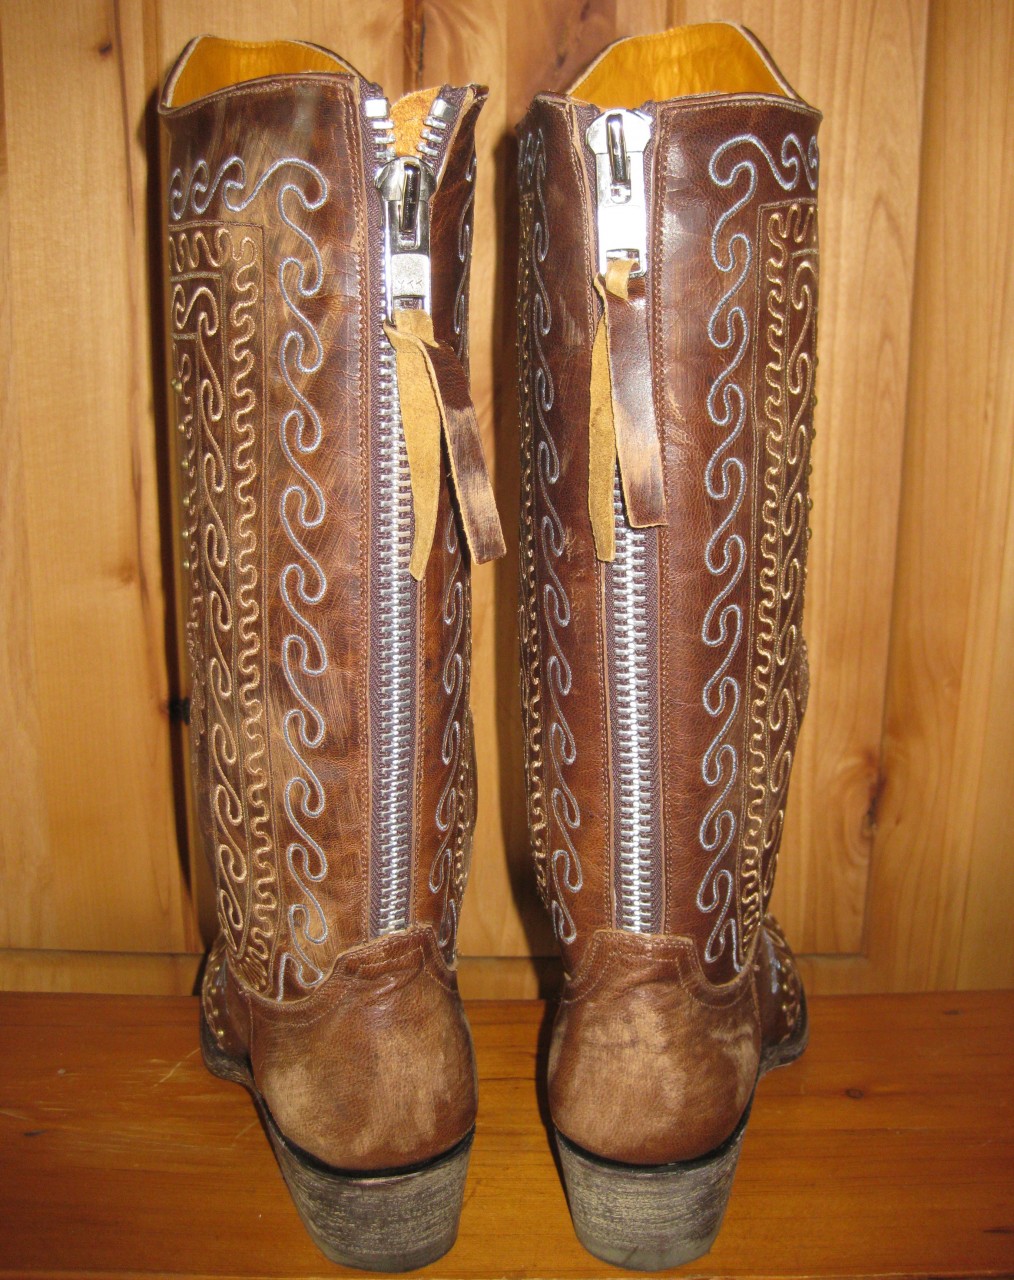 Tall Old Gringo boots